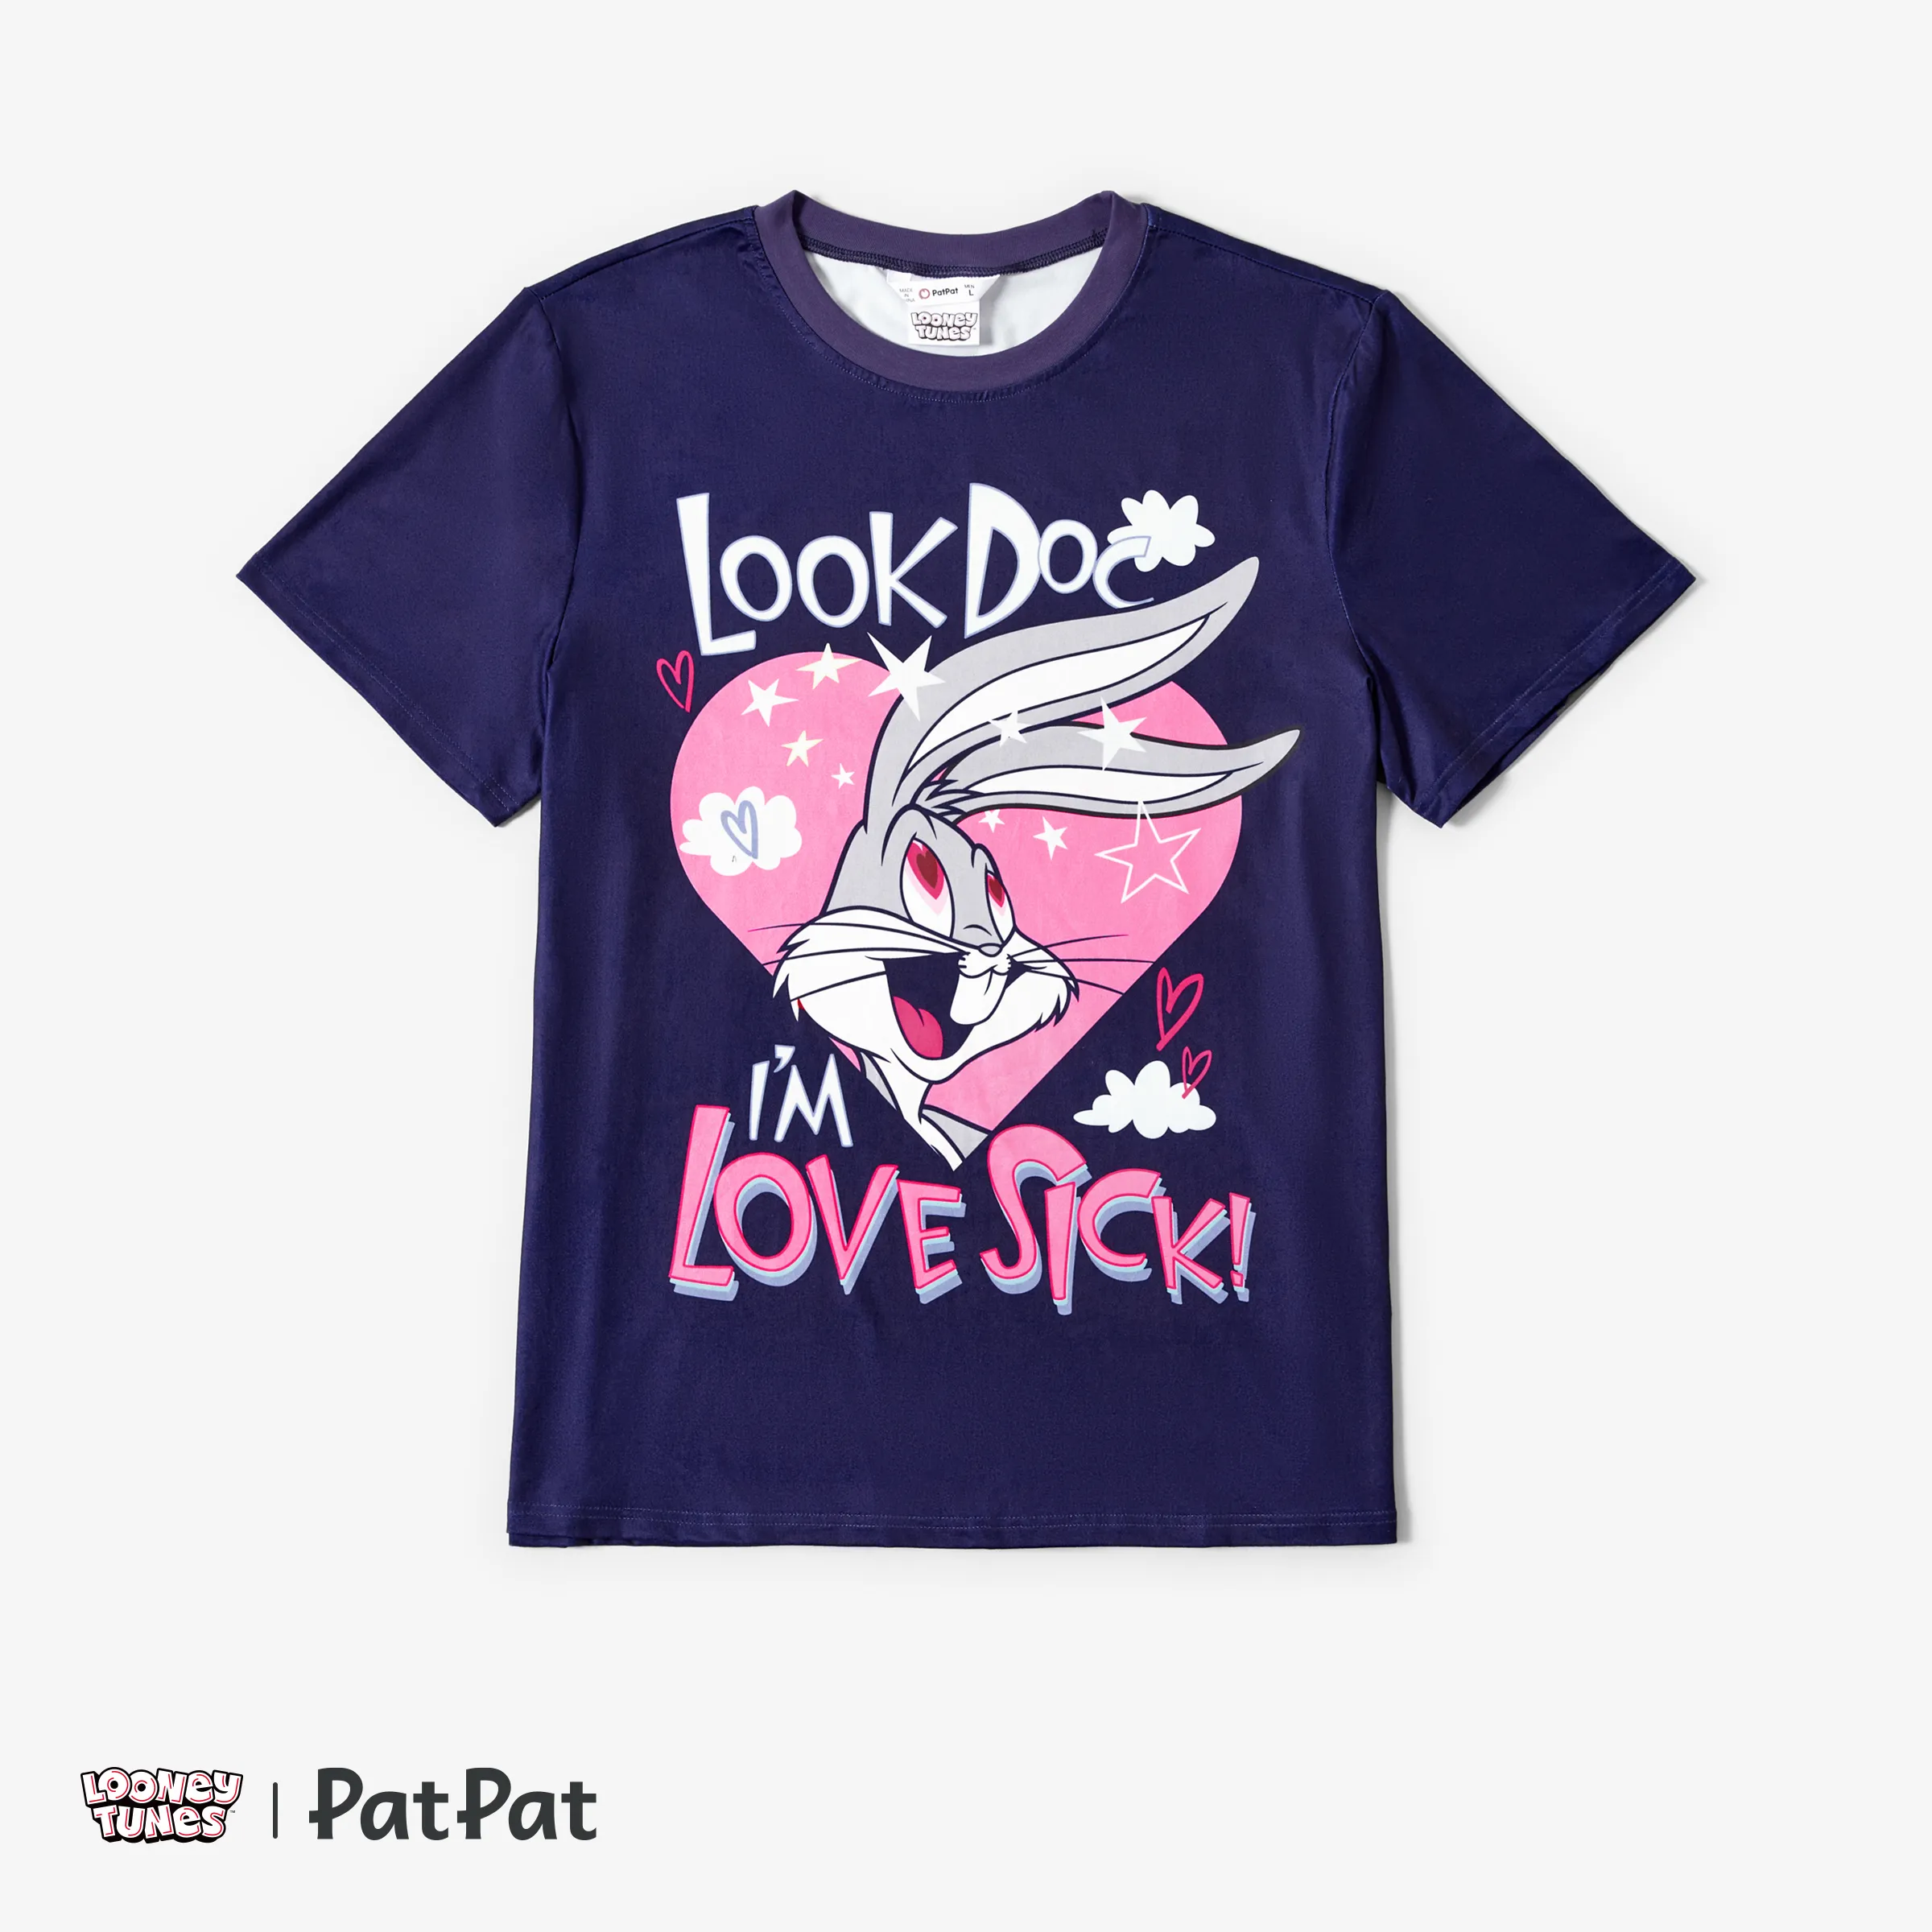 Looney Tunes Family Matching Valentine's Day 1pc Heart Floral Print Tshirt Or Drawstring Dress